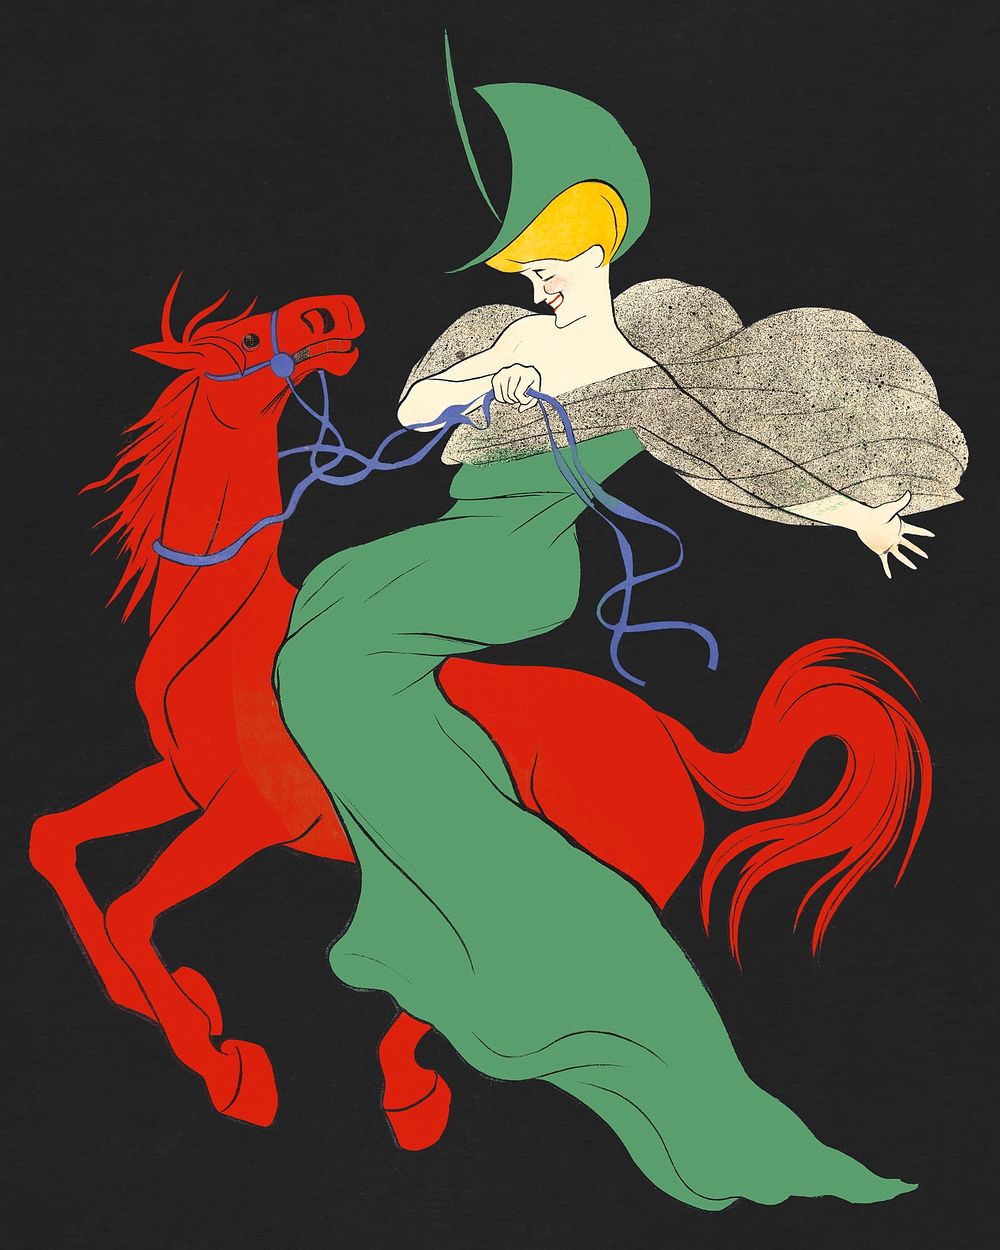 Woman galloping on a red horse, remixed from artworks by Leonetto Cappiello